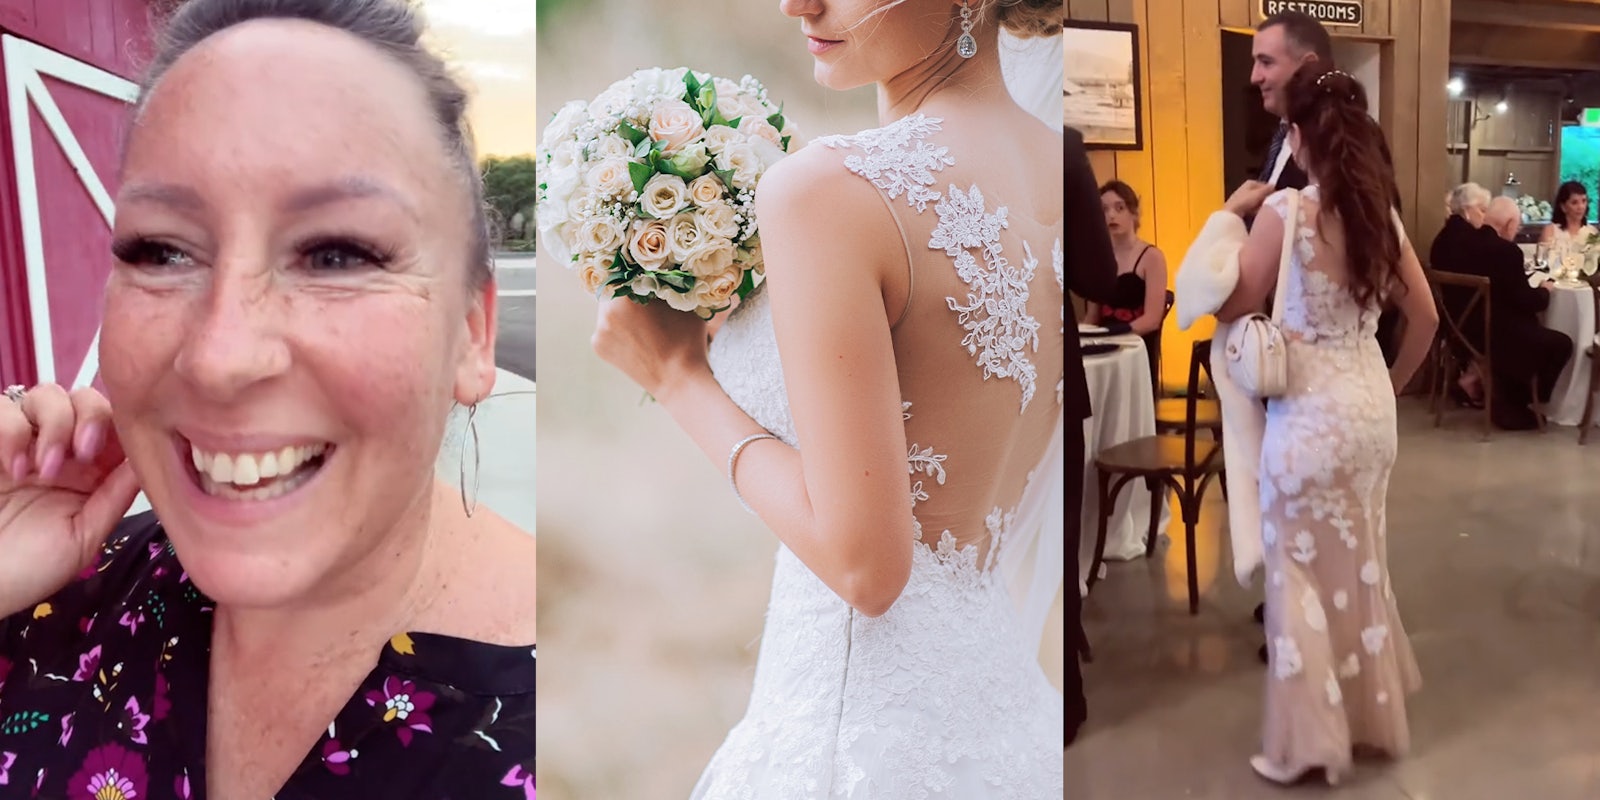 Wedding planner confronts 4 wedding guests for wearing white